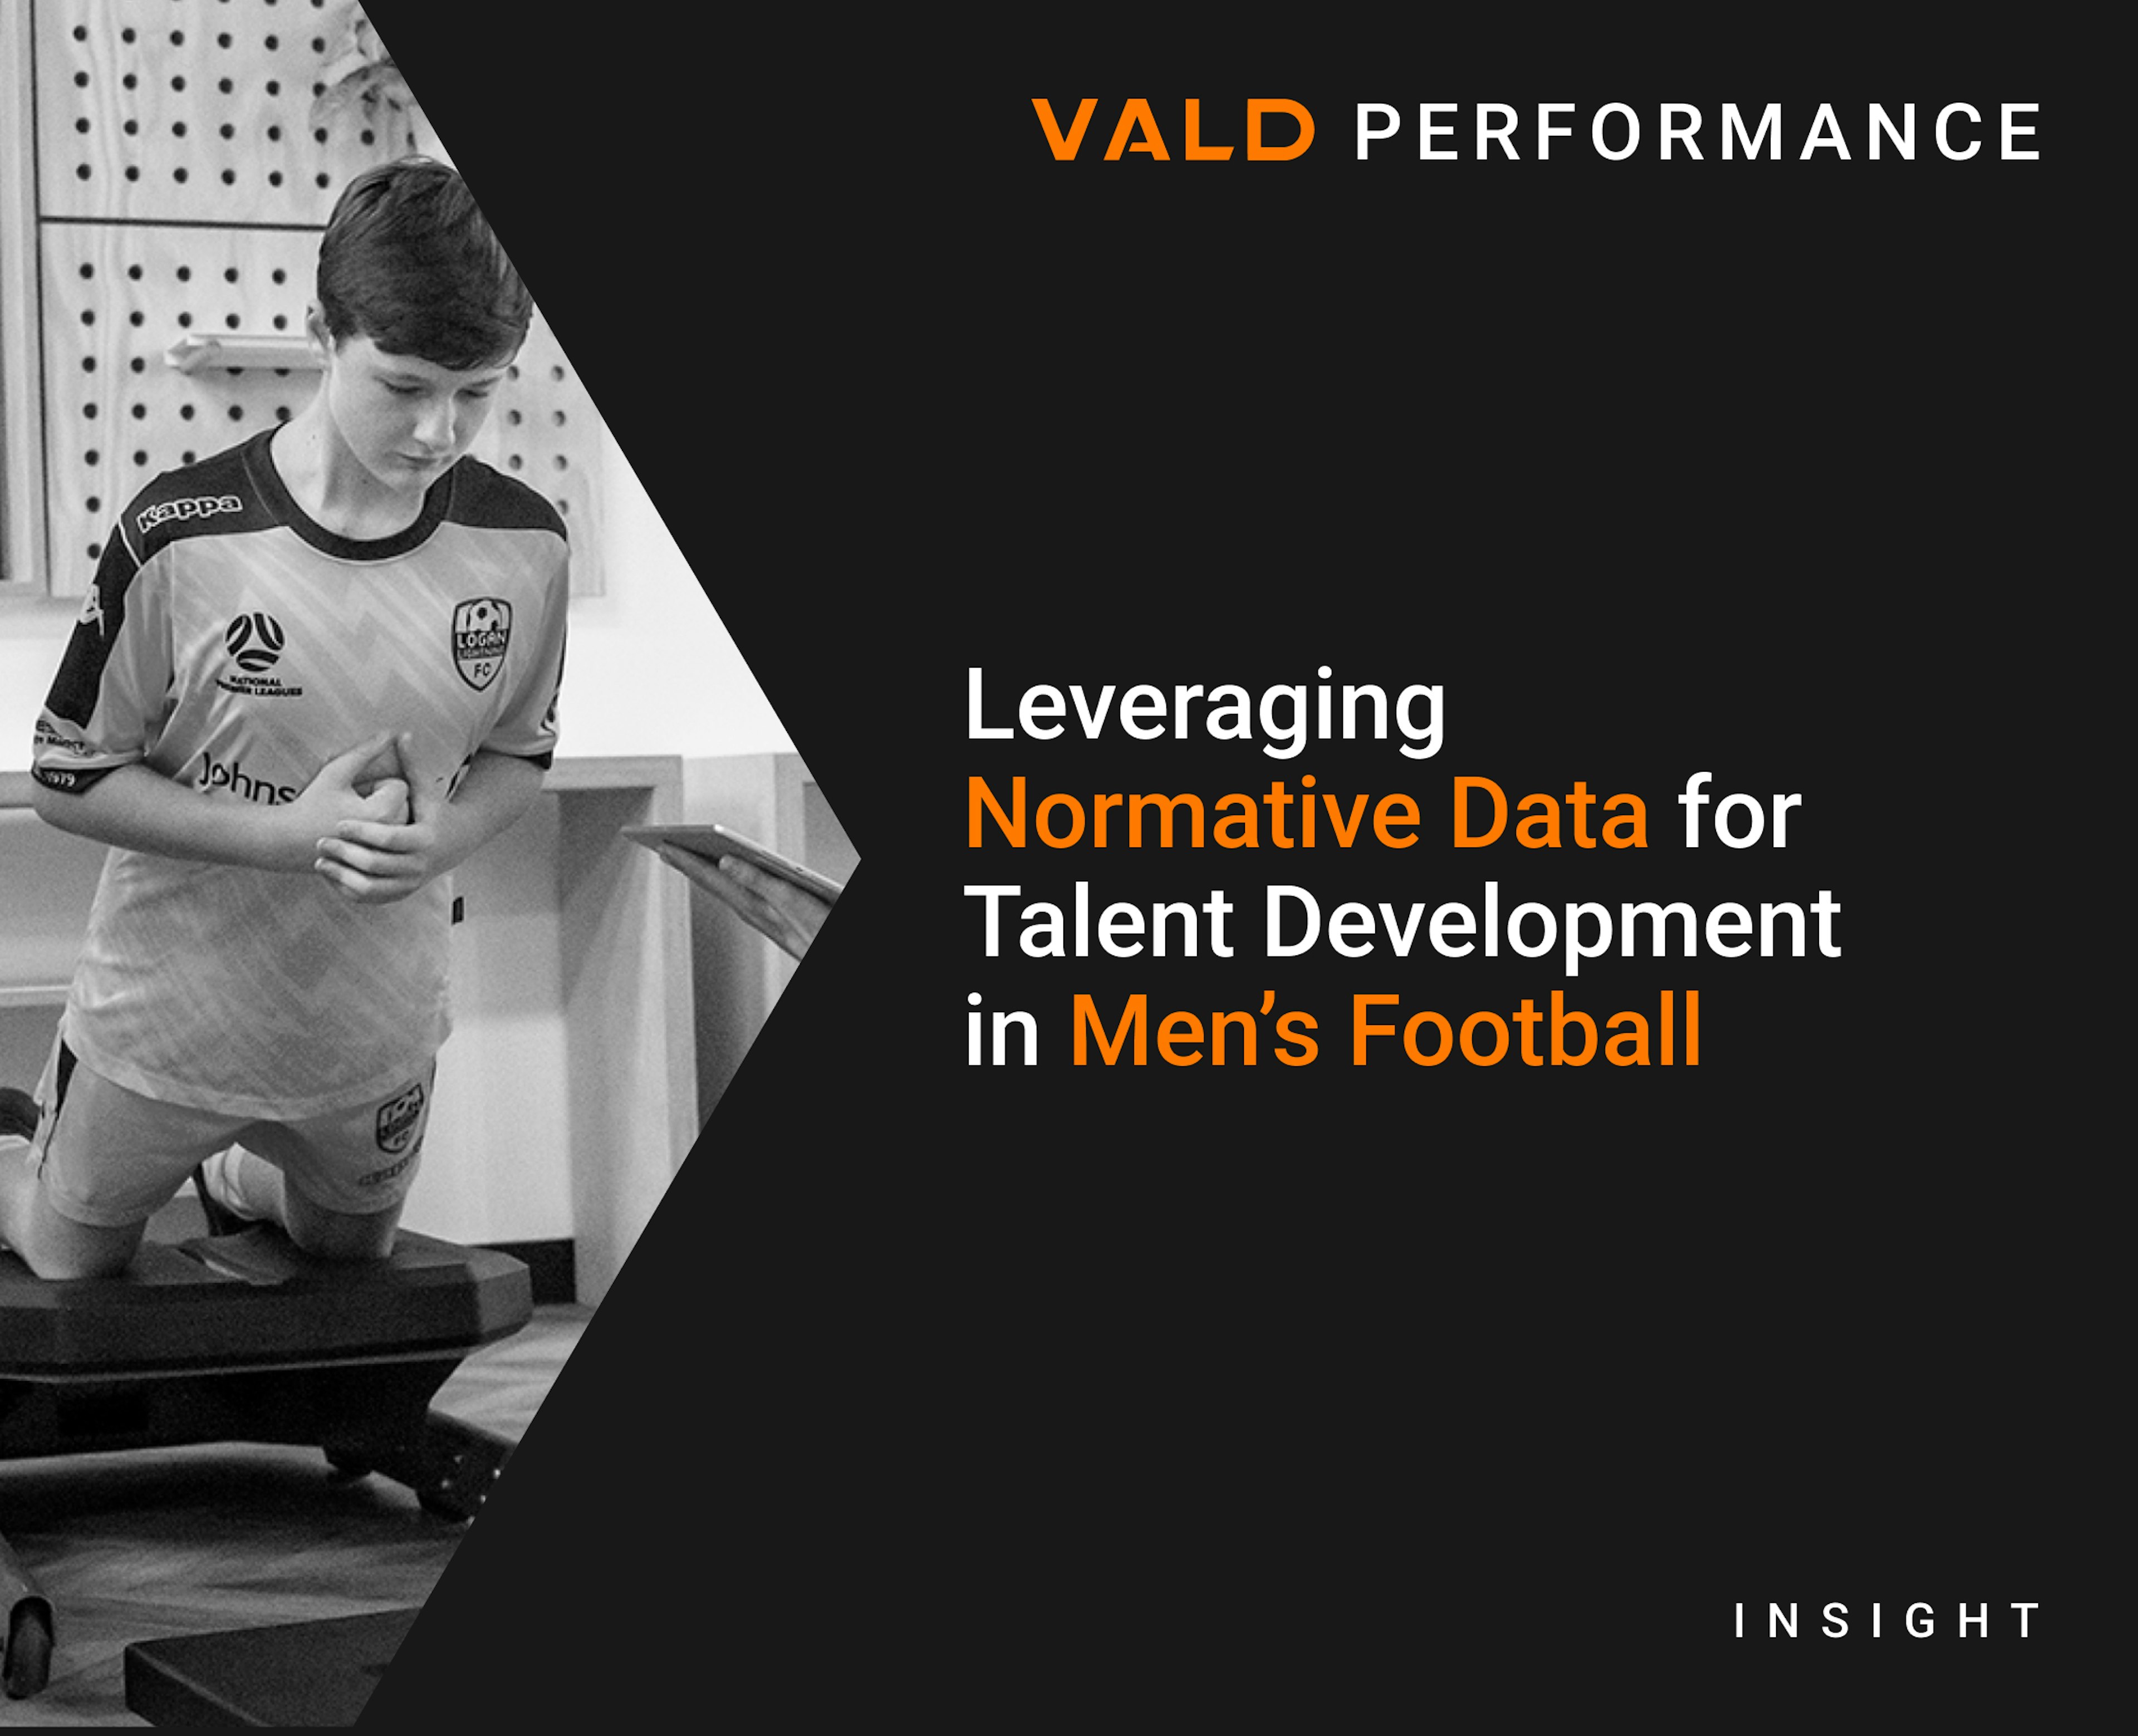 Thumbnail: Leveraging Normative Data for Talent Development in Men's Football